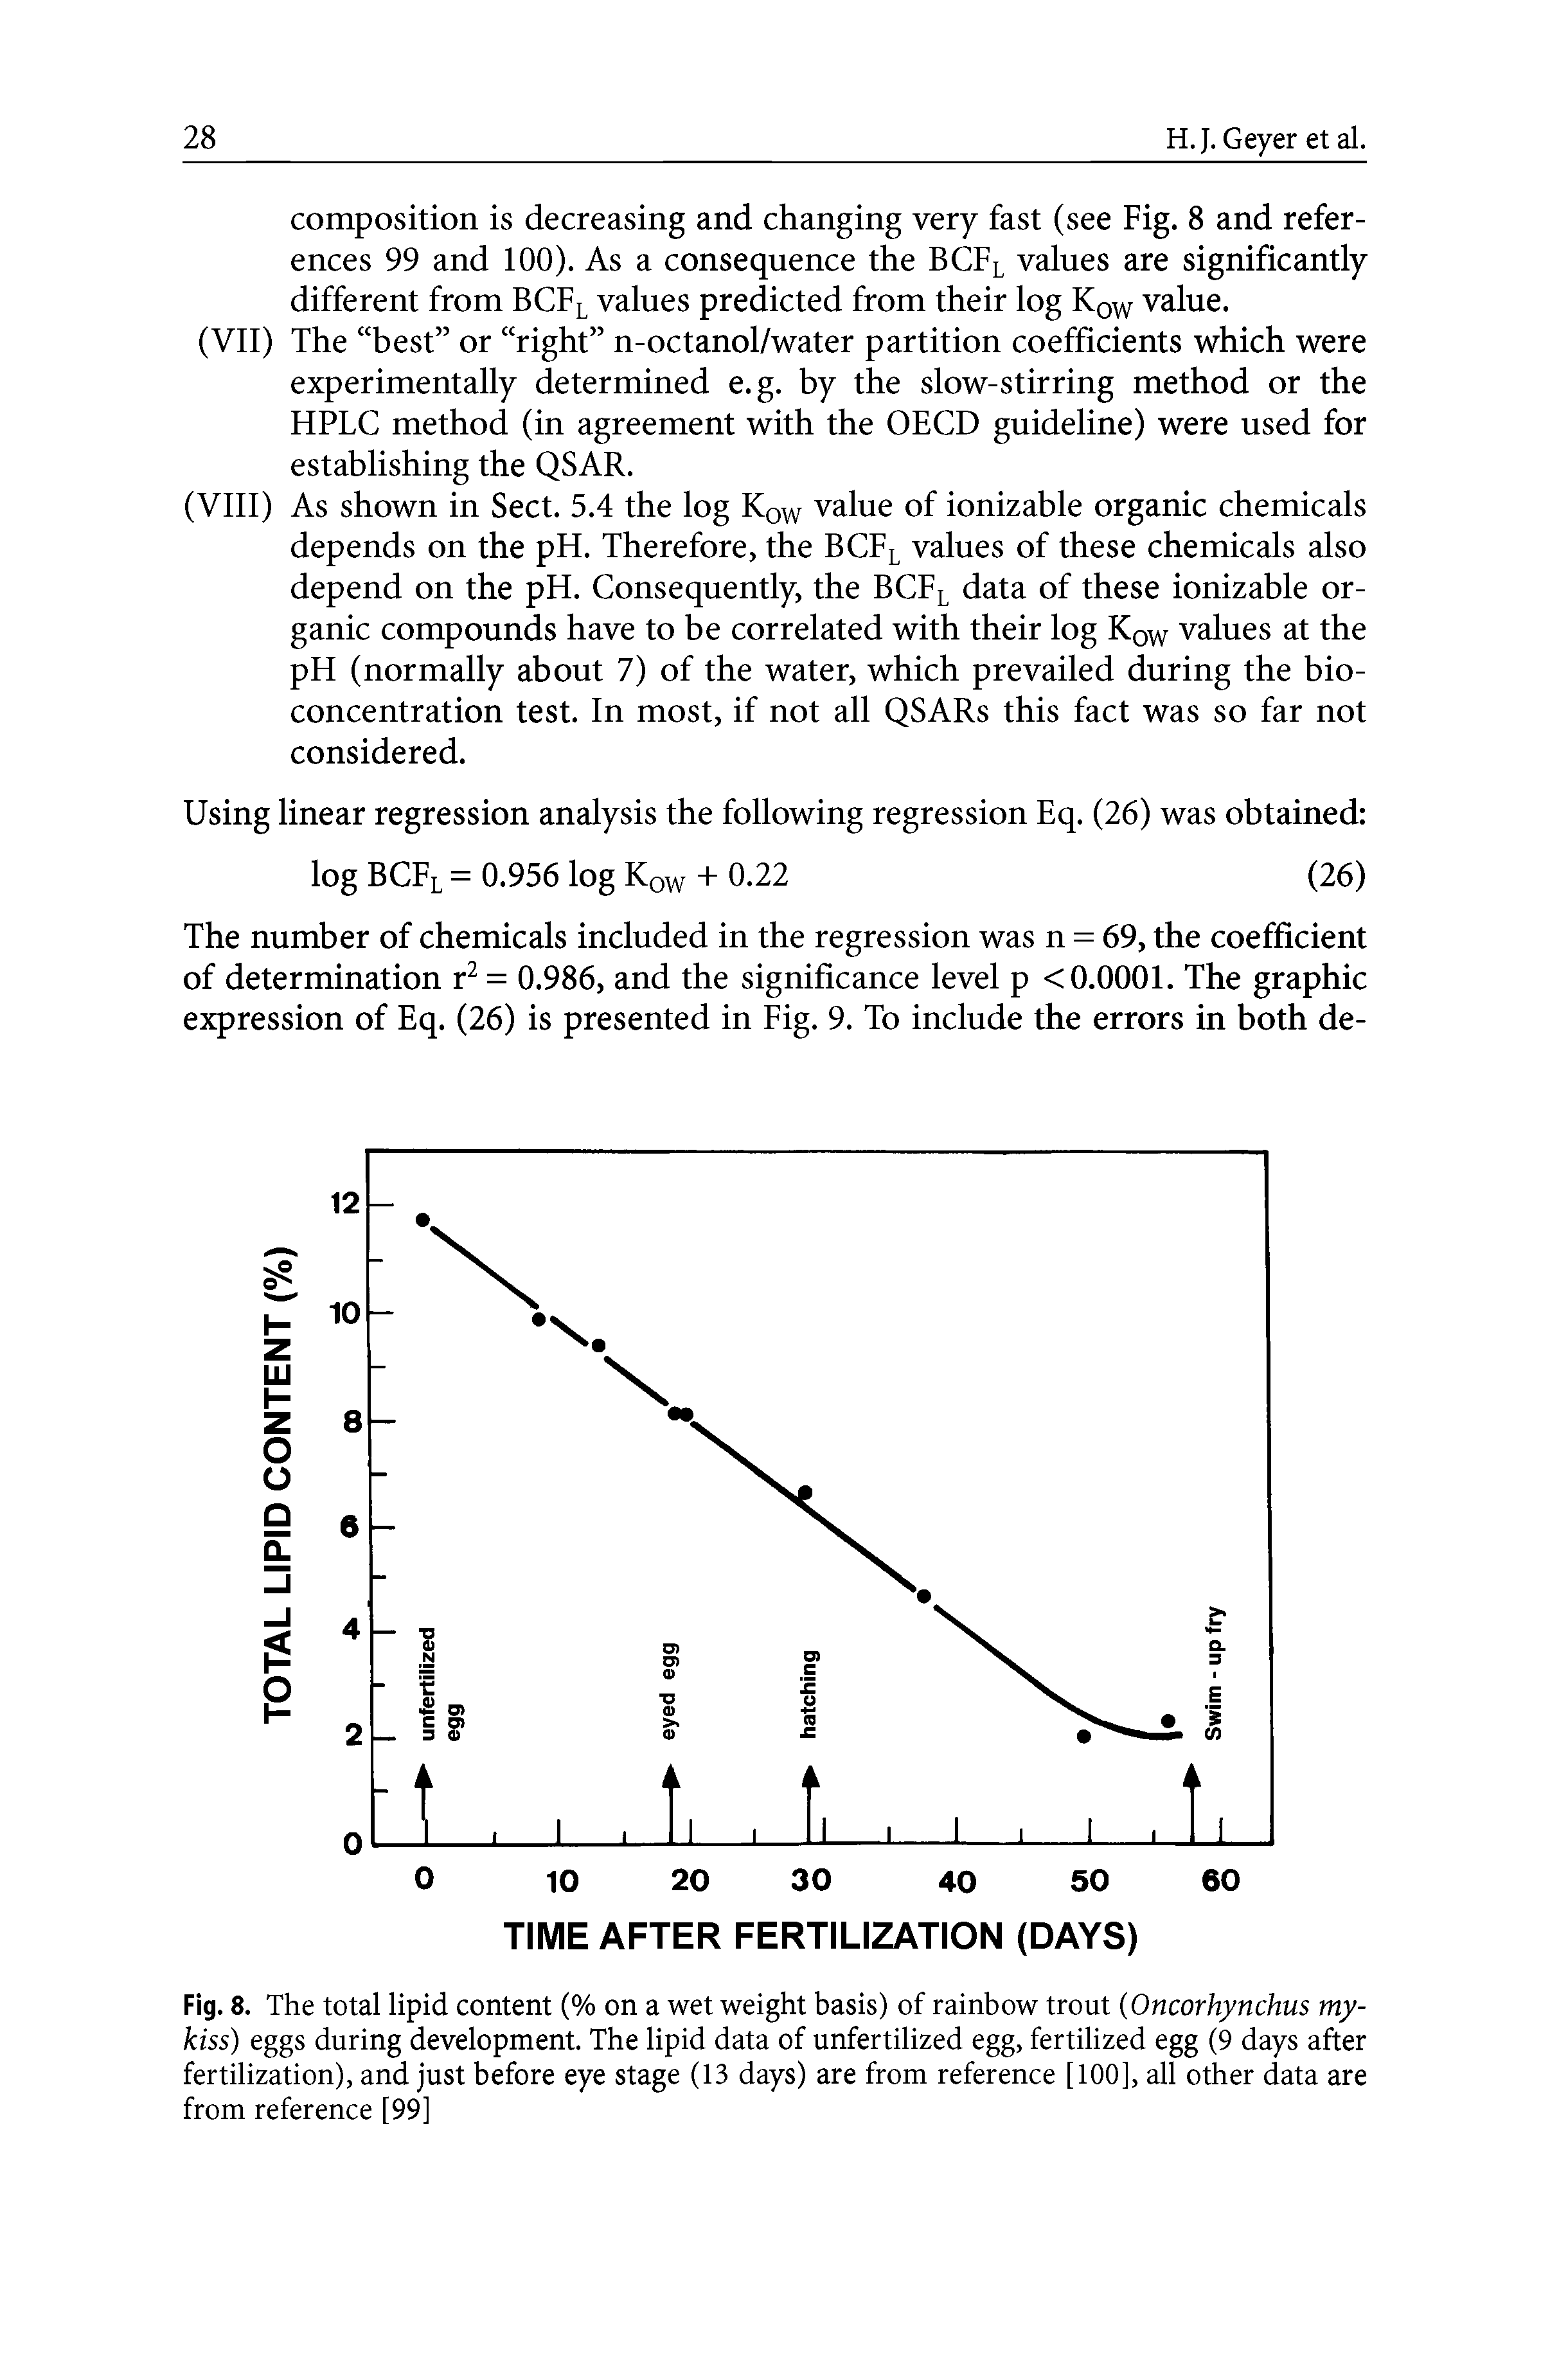 Fig.8. The total lipid content (% on a wet weight basis) of rainbow trout Oncorhynchus my-kiss) eggs during development. The lipid data of unfertilized egg, fertilized egg (9 days after fertilization), and just before eye stage (13 days) are from reference [100], all other data are from reference [99]...